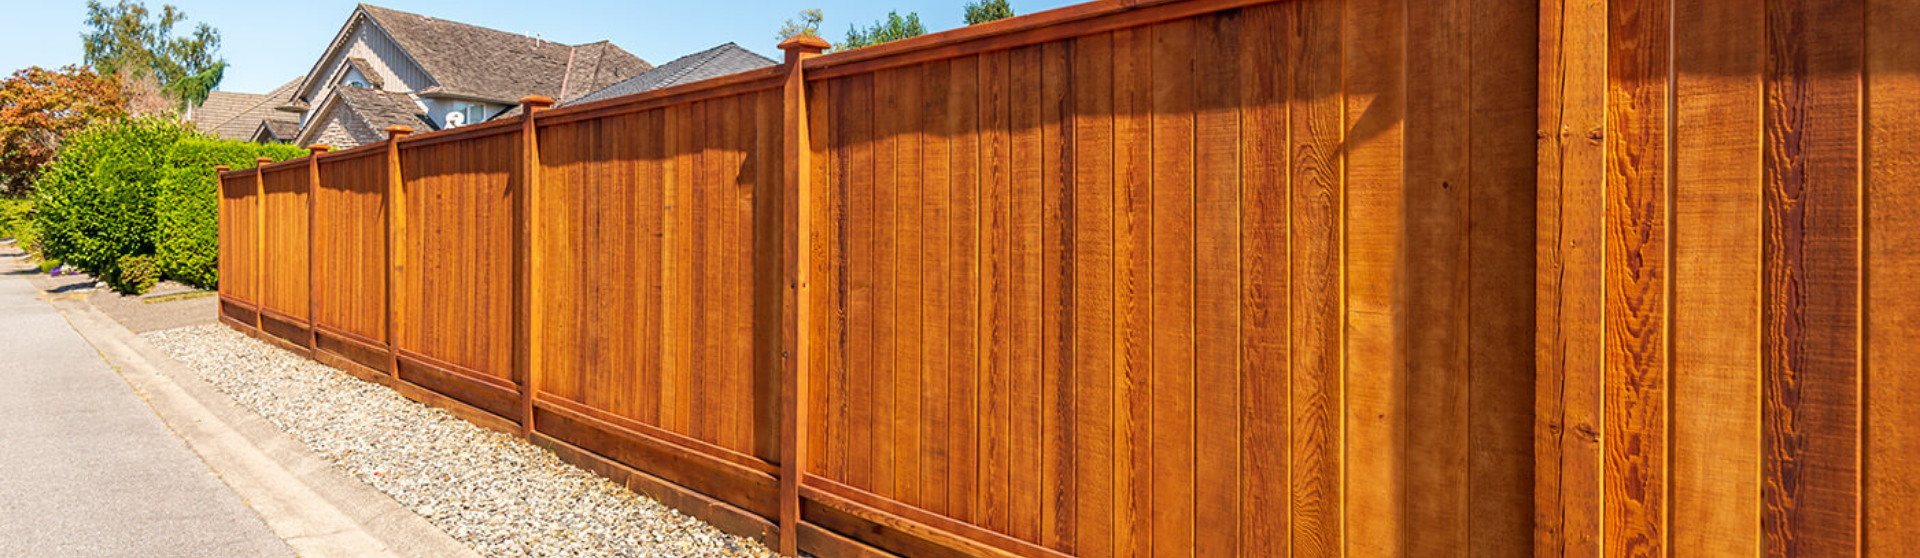 fence staining service